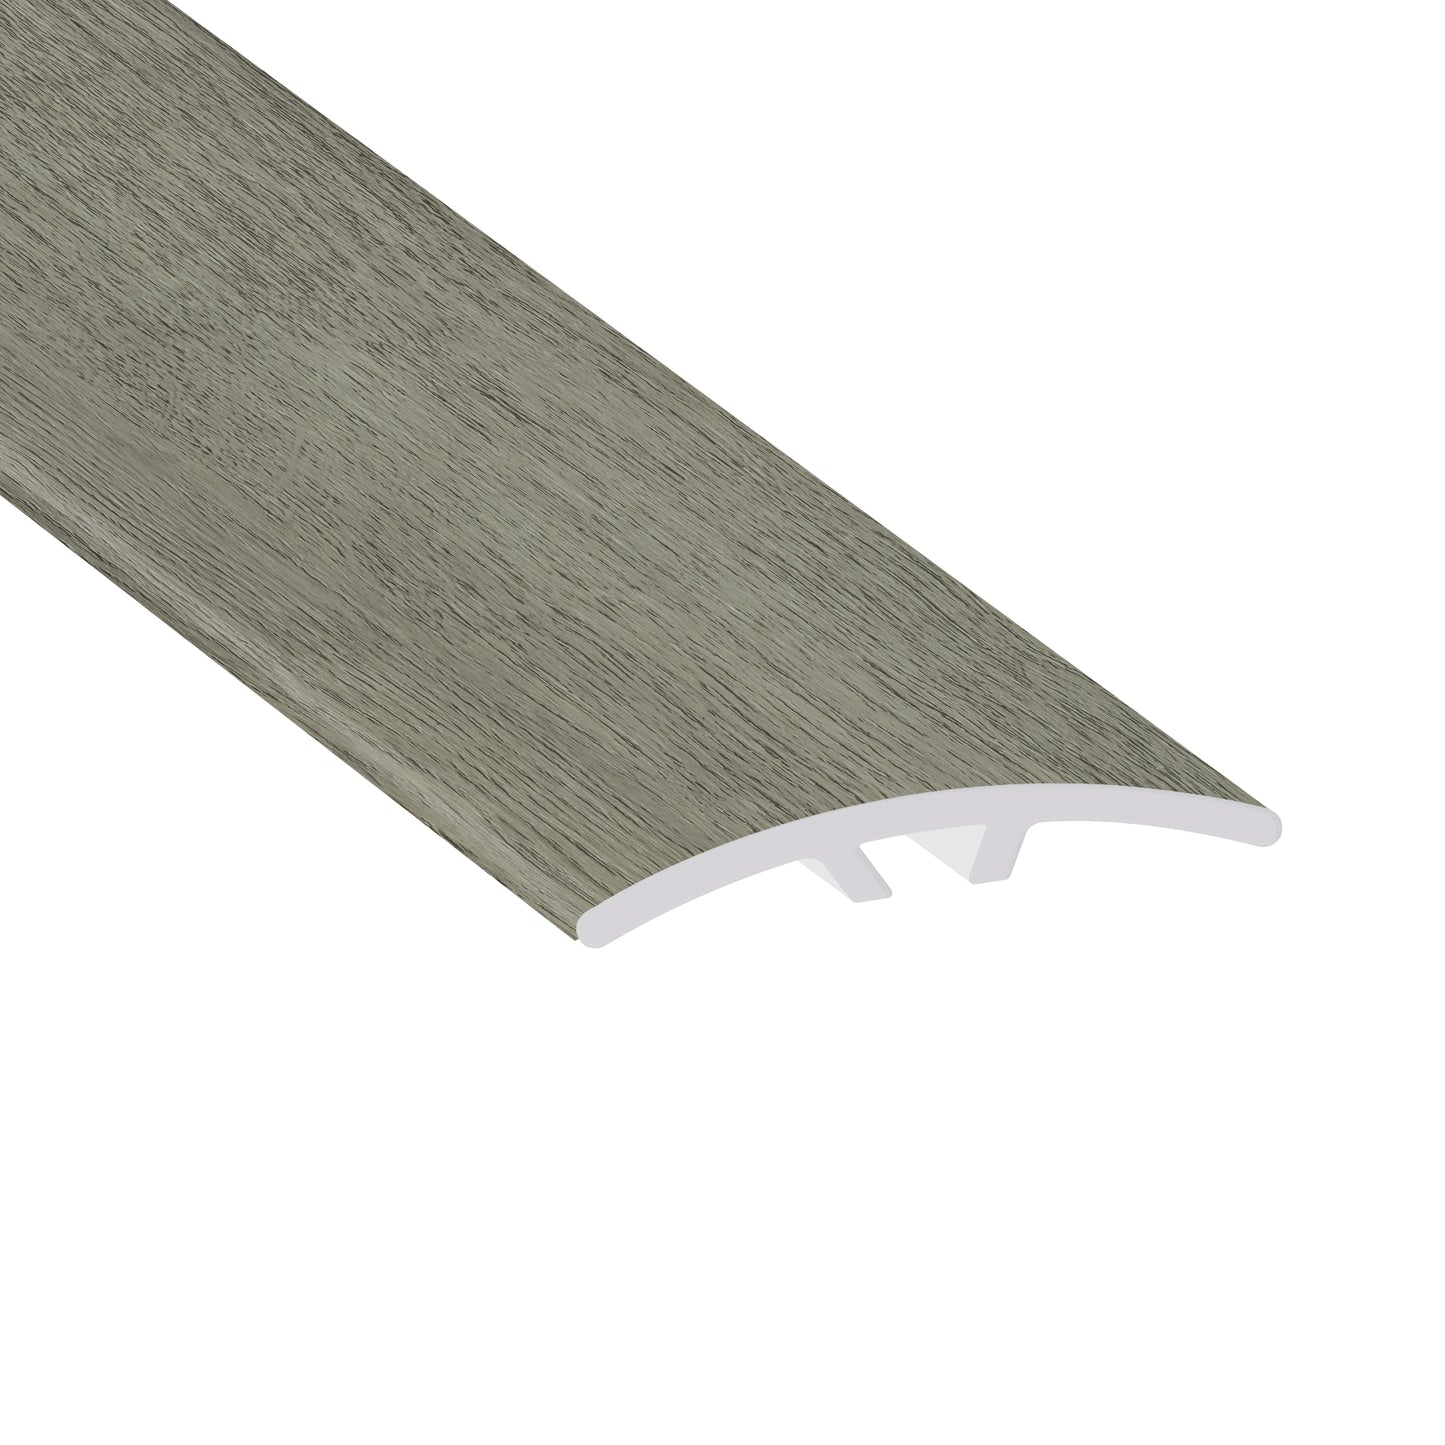 Windswept 0.23 in. Thick x 1.59 in. Width x 94 in. Length Multi-Purpose Reducer Vinyl Molding